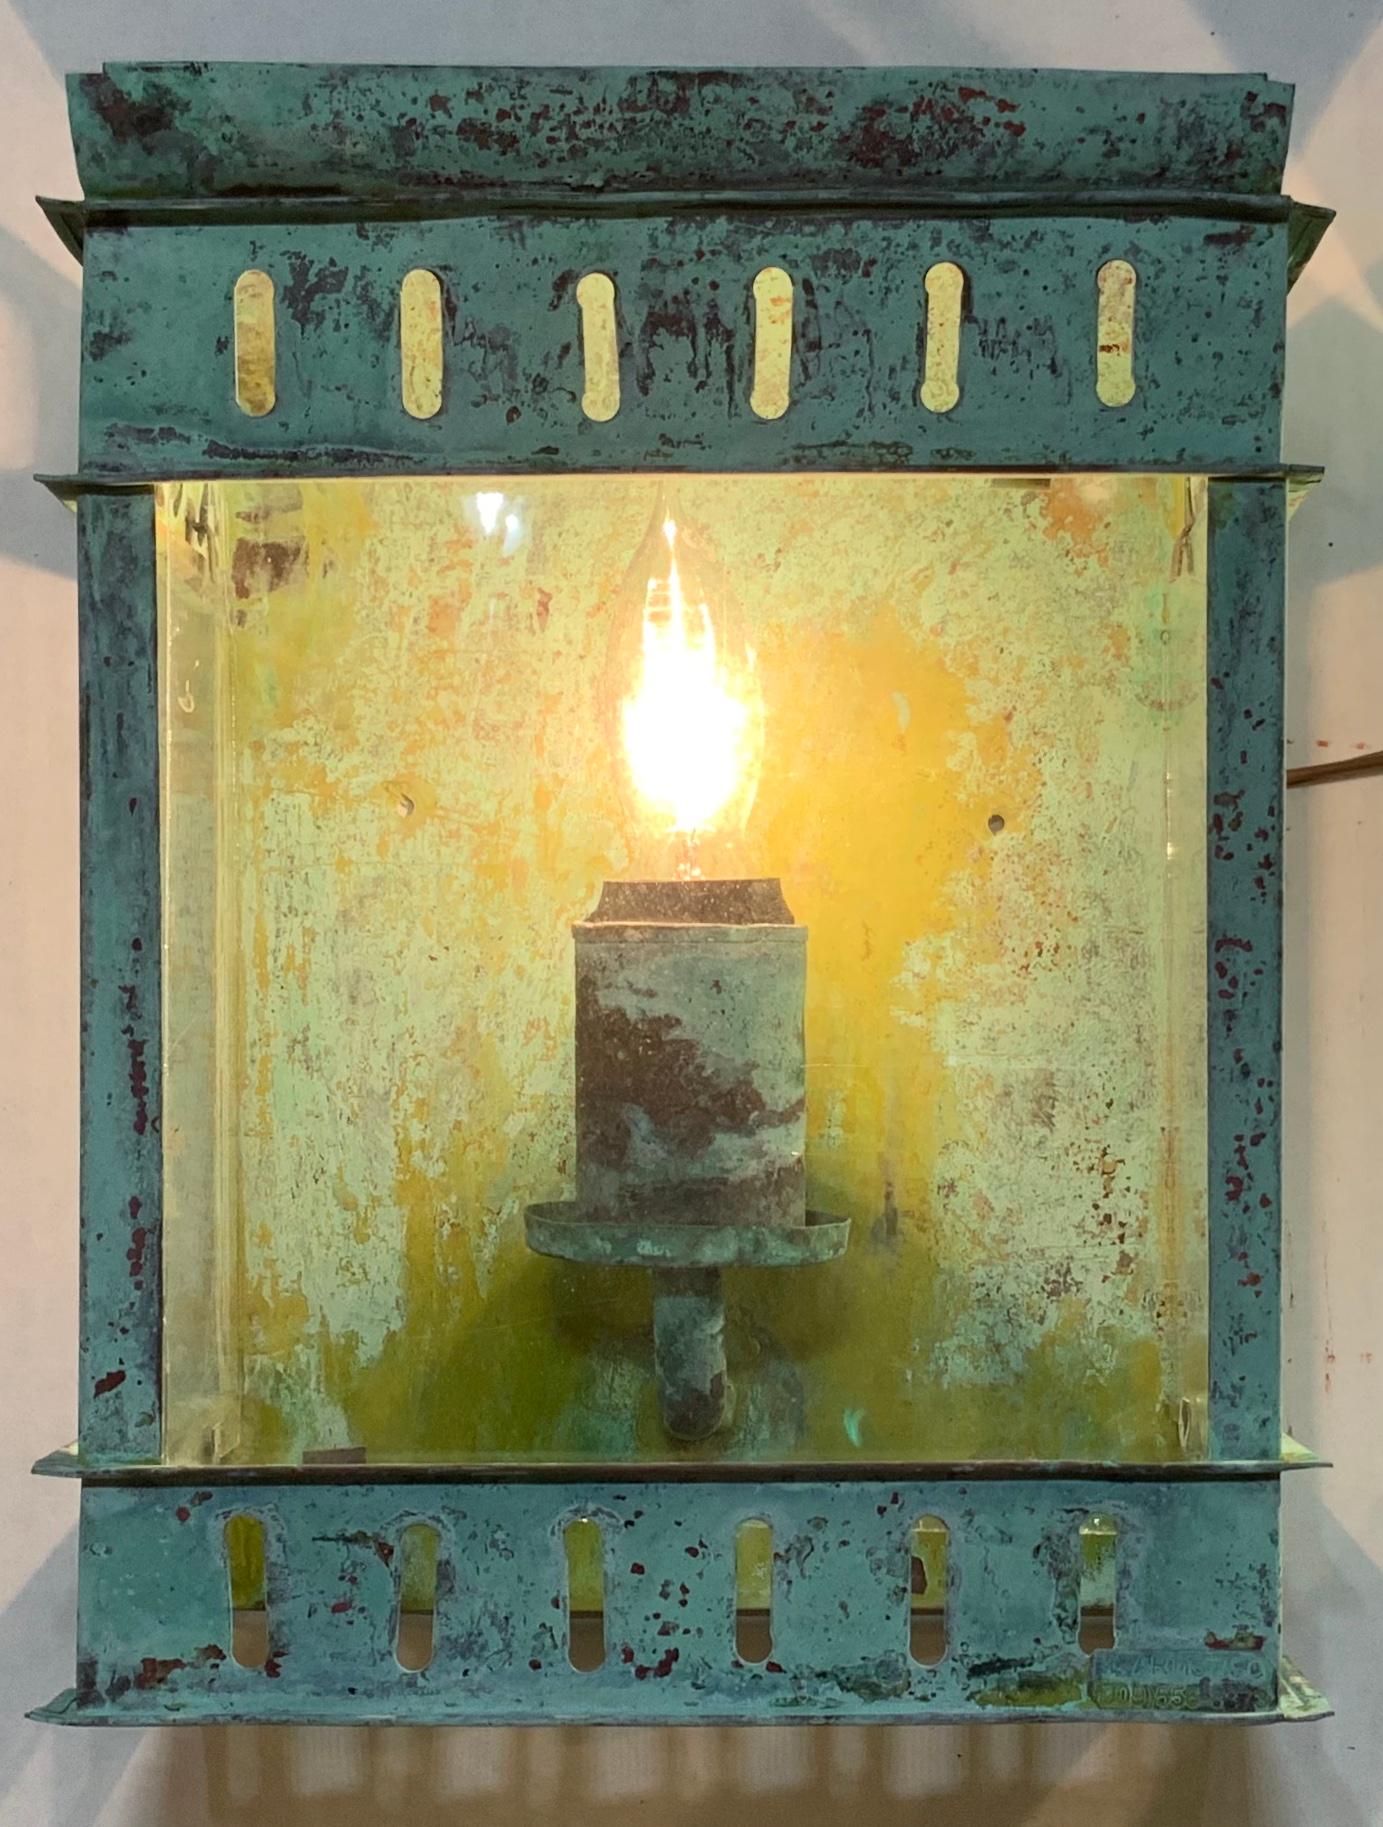 Artsy pair of wall lantern hand forged from solid copper with one 60/watt light each, suitable for wet location, beautiful oxidized patina. This pair were hand fabricated by the artist and slightly
Deferent is the socket one with cap the other